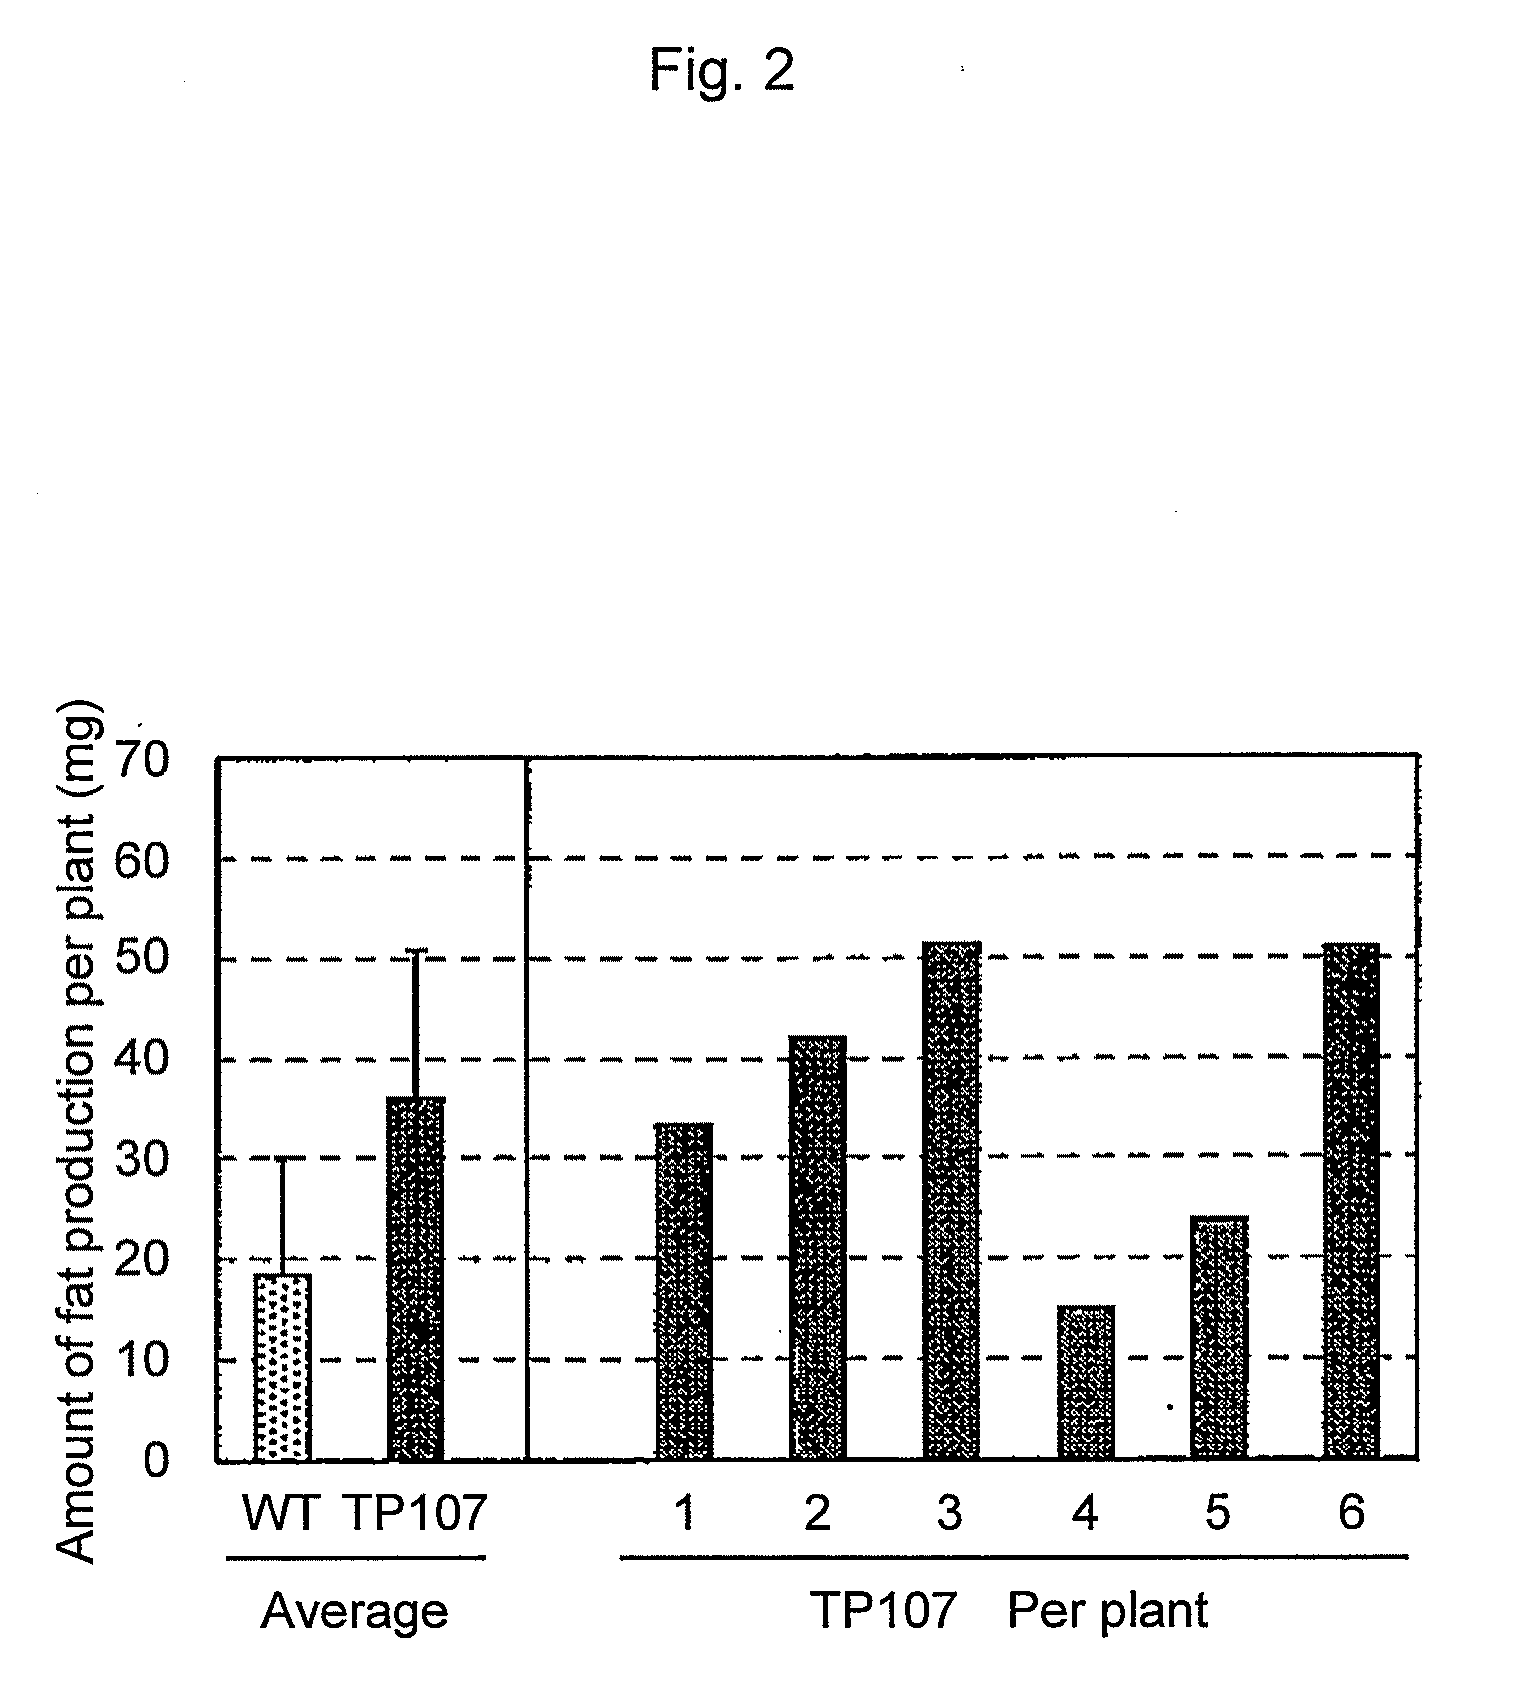 Genes that increase plant oil and method for using the same